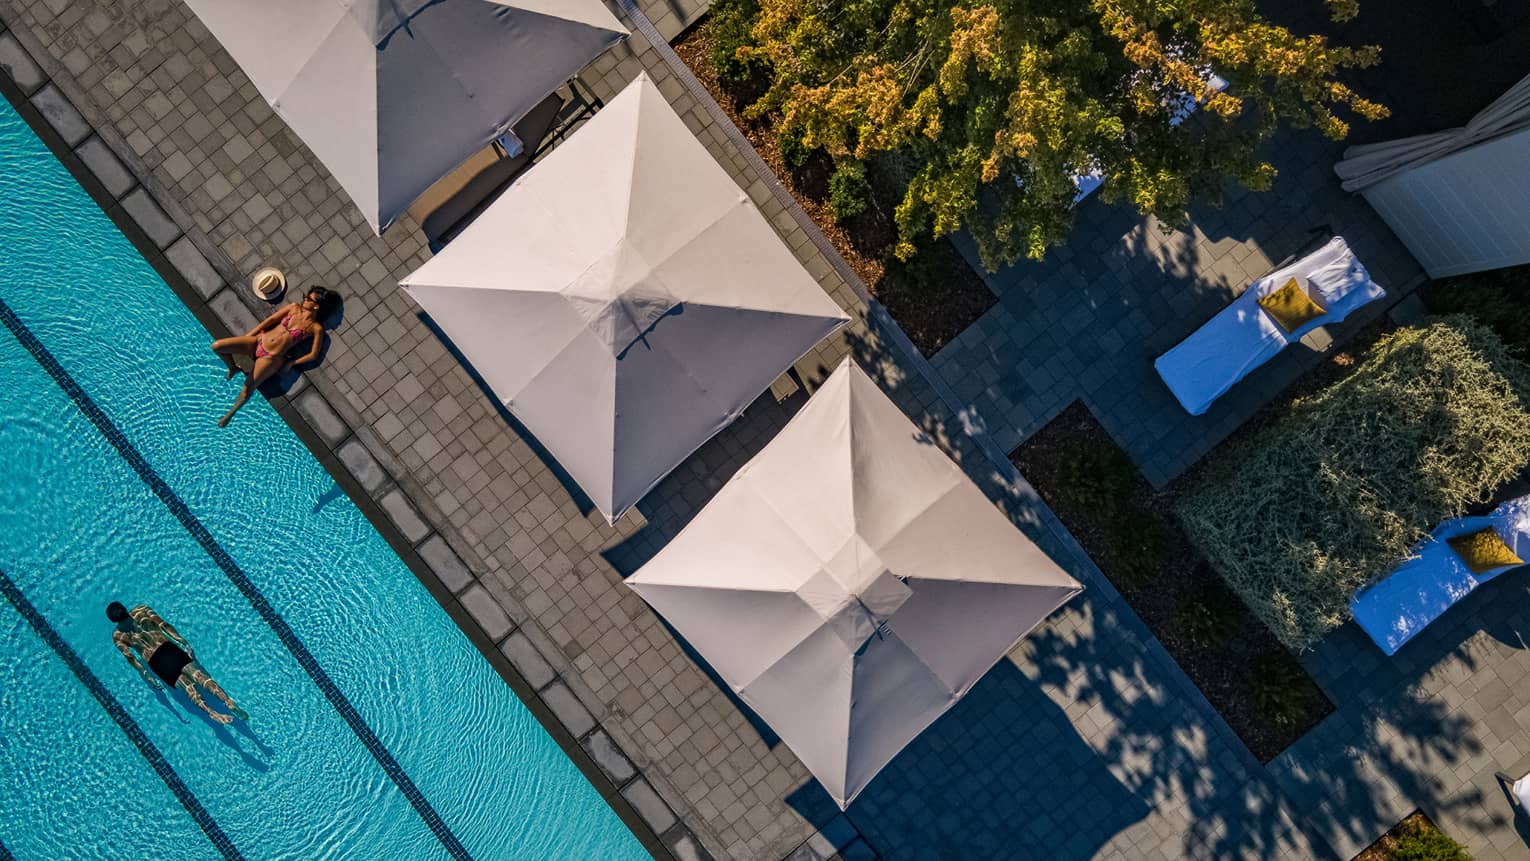 Aerial view of the pool and cabanas, with one person swimming and the other laying on the side of the pool.